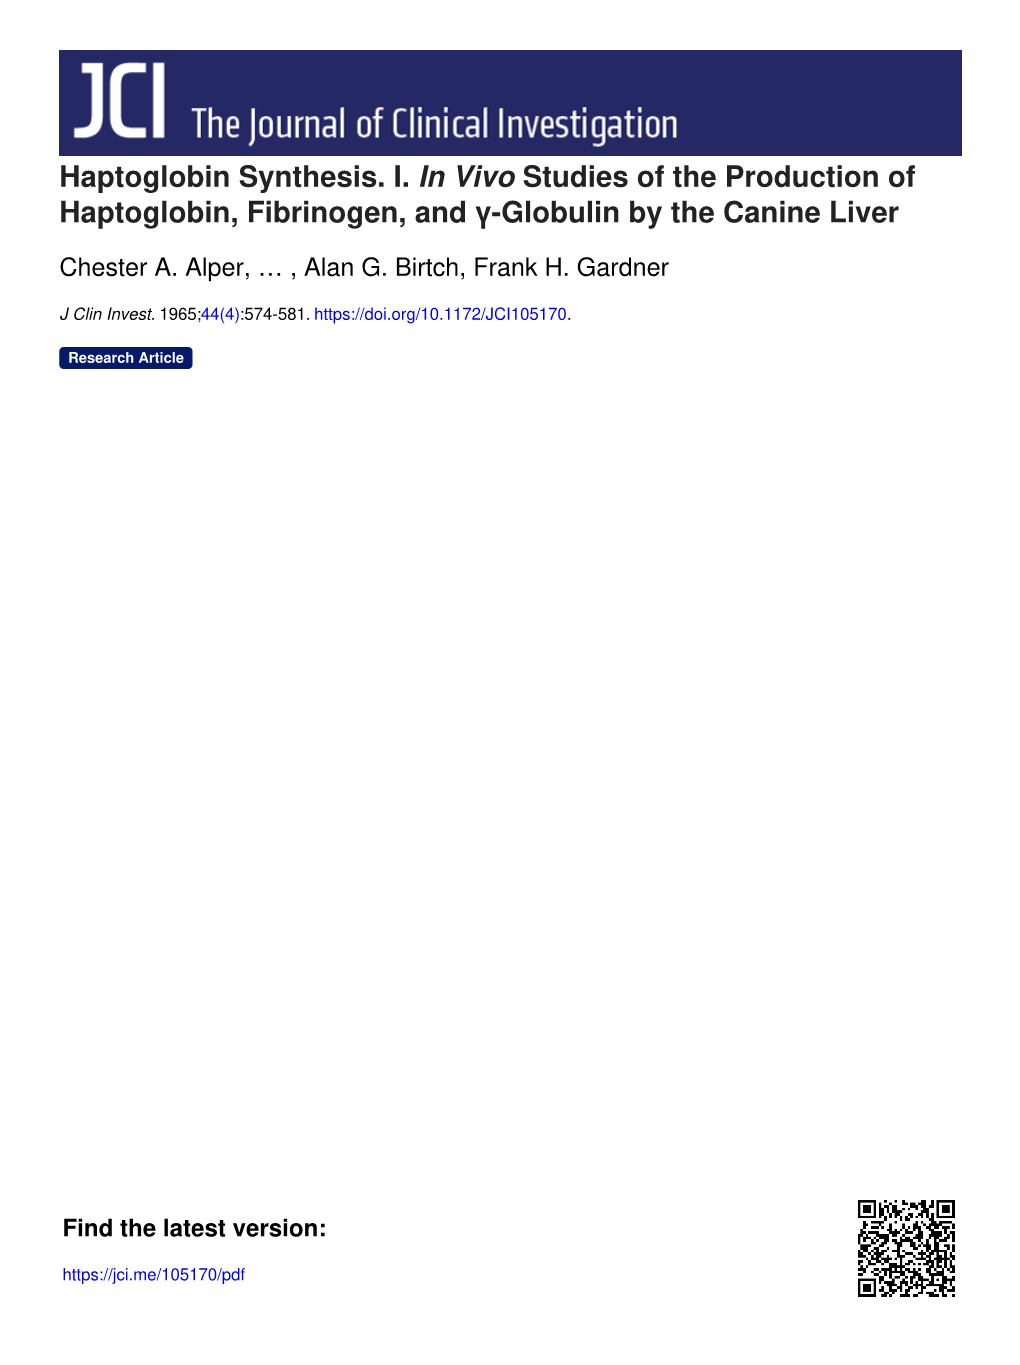 Haptoglobin Synthesis. I. in Vivo Studies of the Production of Haptoglobin, Fibrinogen, and Γ-Globulin by the Canine Liver